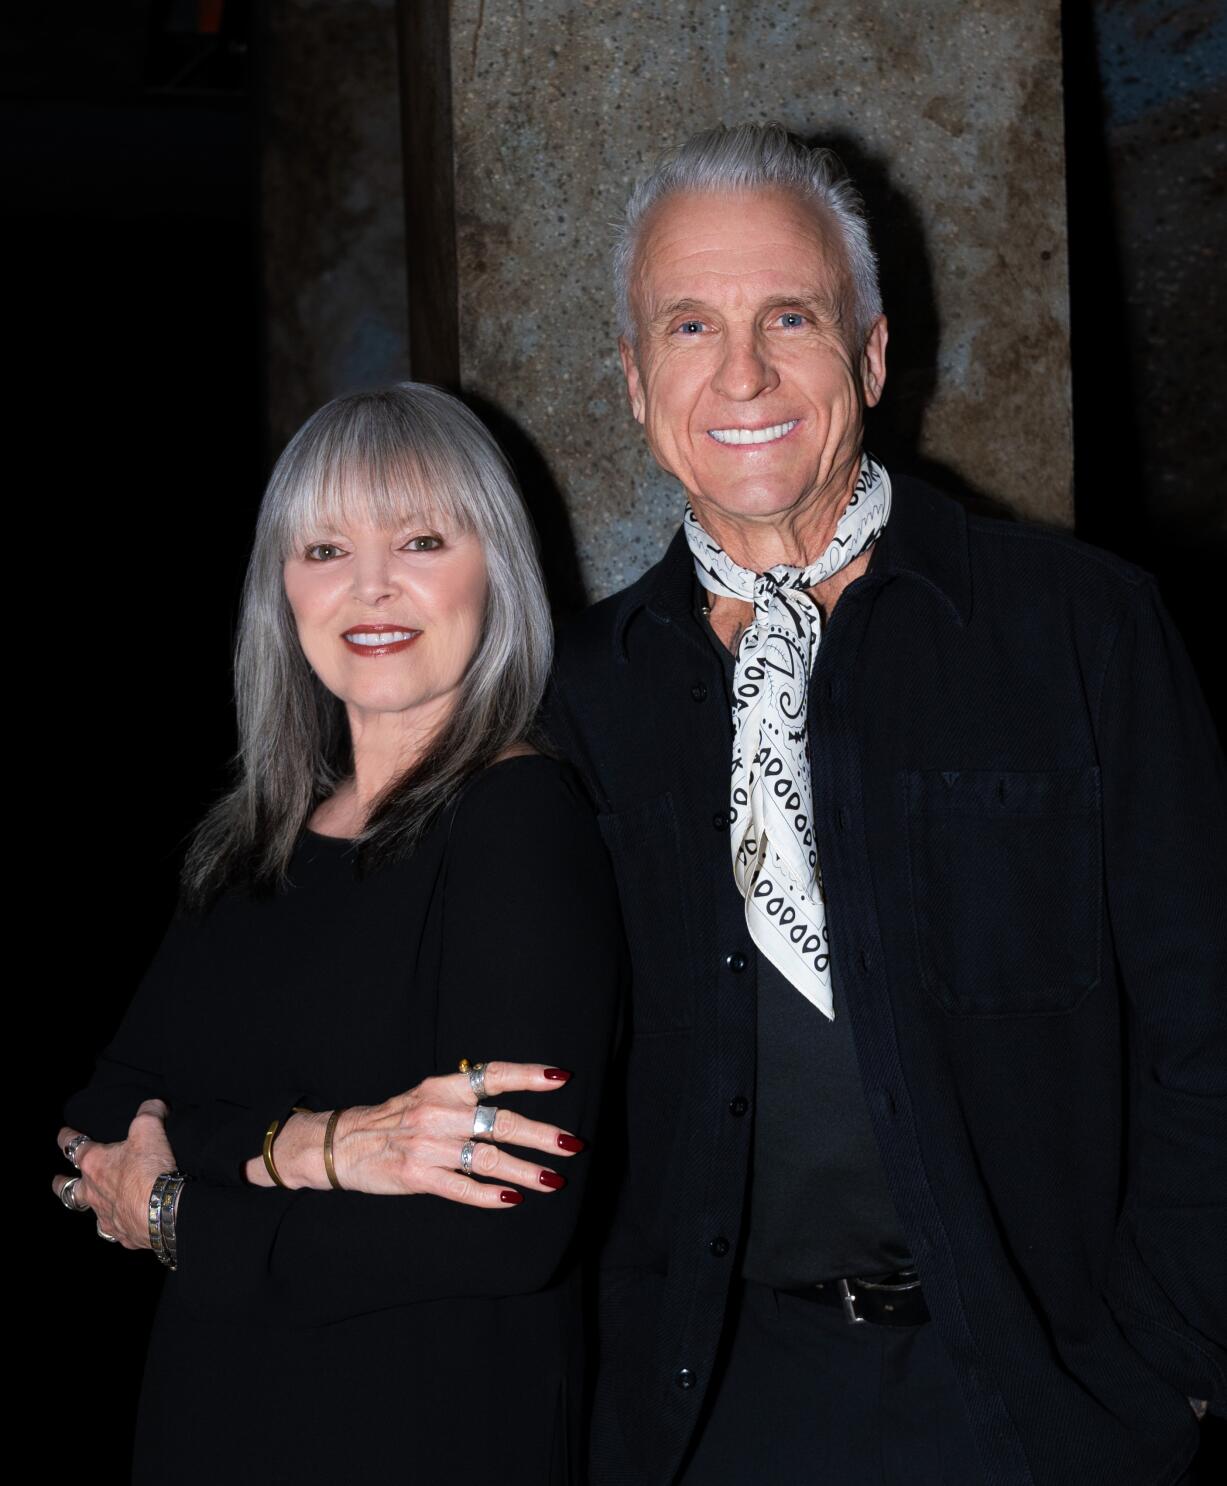 Pat Benatar and Neil Giraldo's epic love story is now a musical